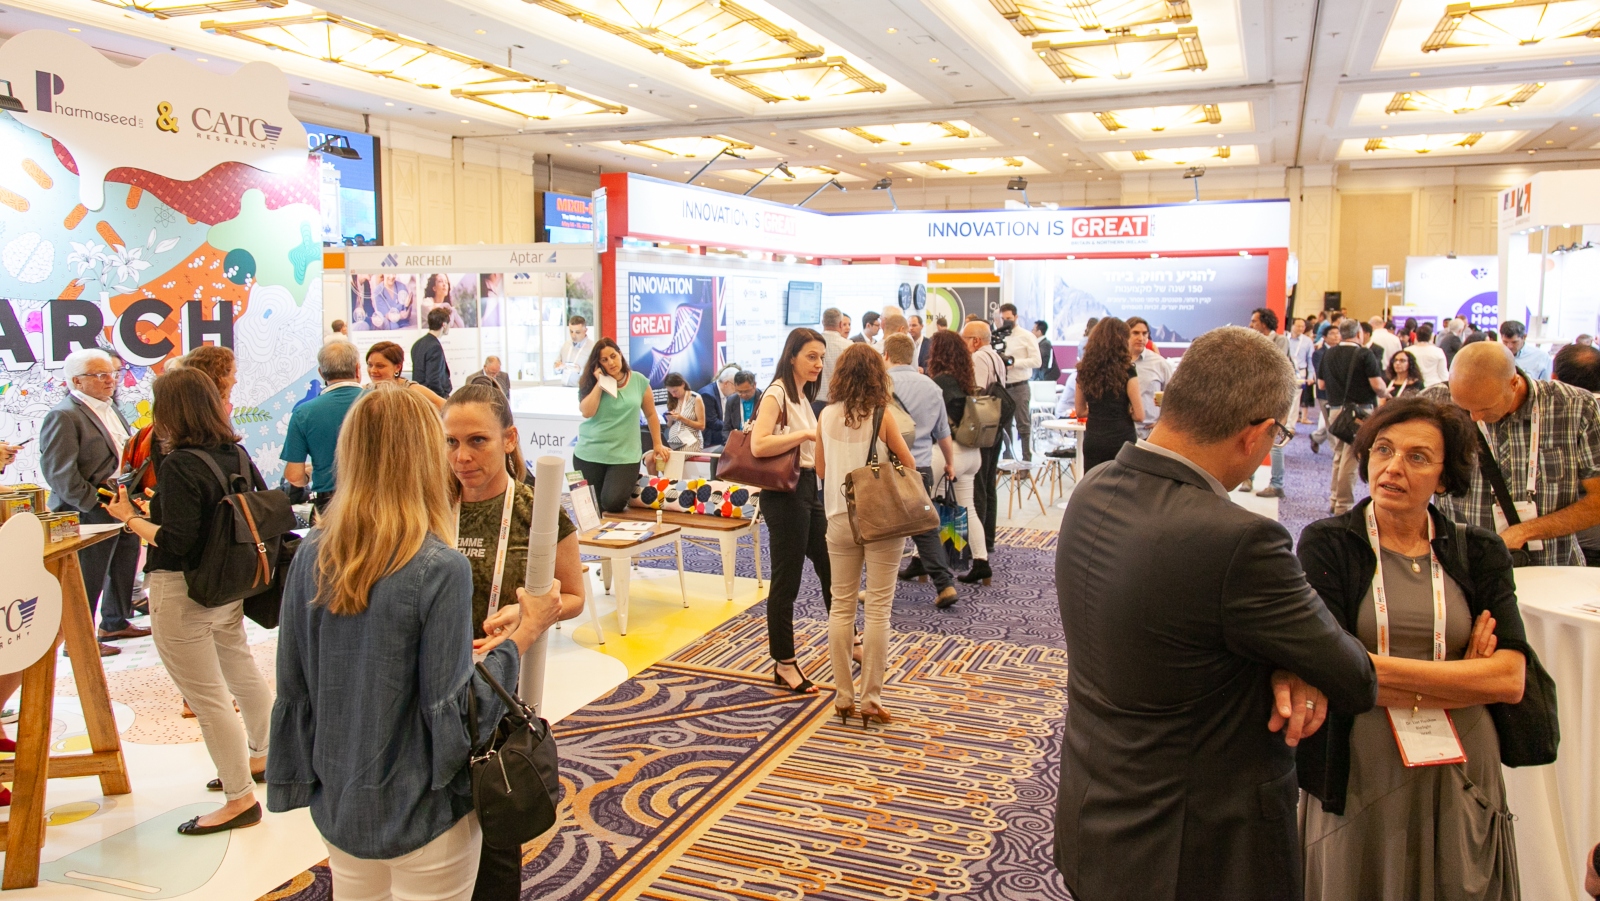 Biomed Israel is an annual life sciences and health-tech event in Tel Aviv. Photo by Alexander Elman